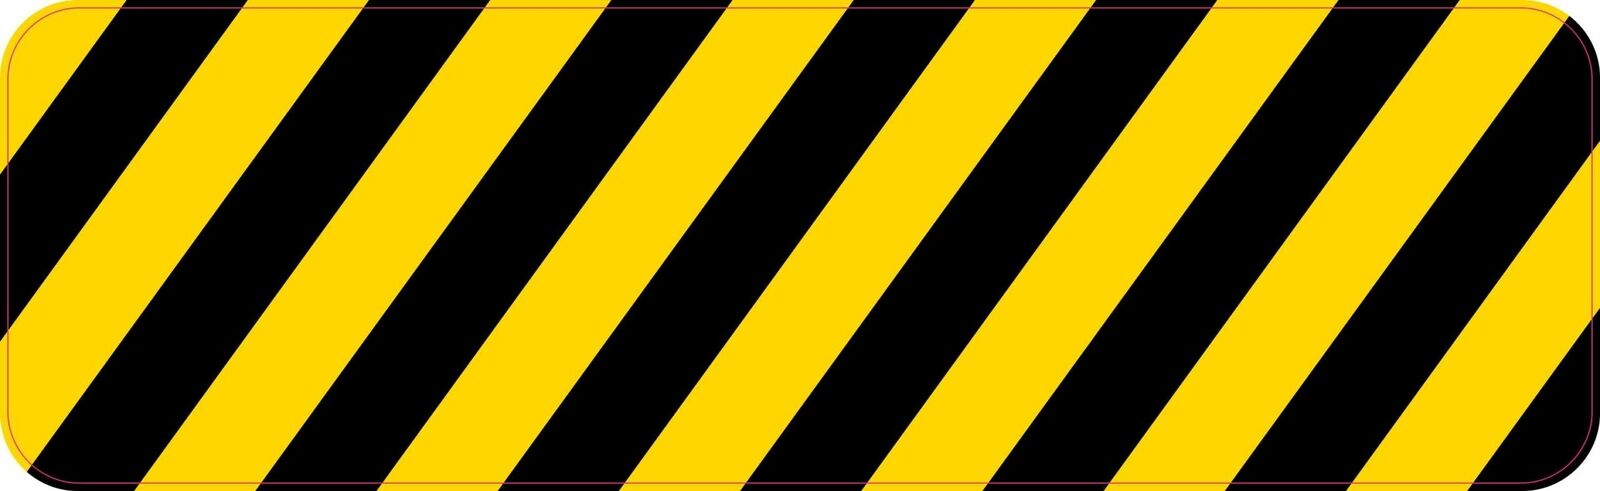 10in x 3in Caution Stripes Magnet Car Truck Vehicle Magnetic Sign